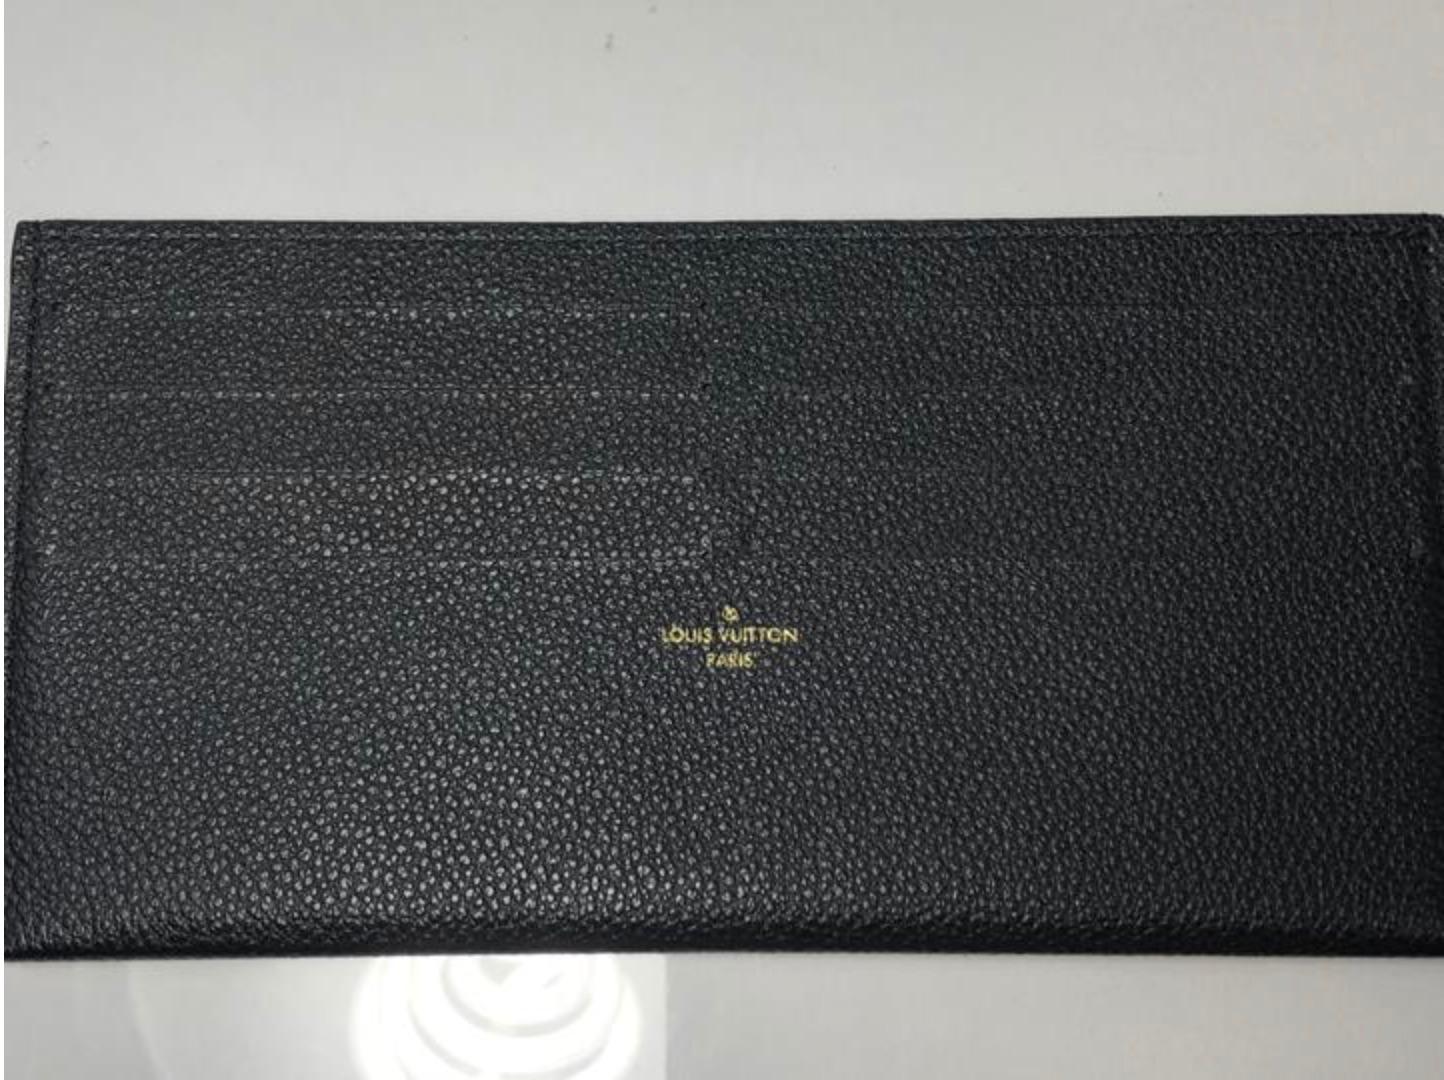 MODEL - Louis Vuitton Empreinte Pochette Felicie Card Holder Wallet Insert in Black 

CONDITION - New! No signs of wear.

SKU - 2865

ORIGINAL/CURRENT RETAIL PRICE - 525 + tax

DATE/SERIAL CODE - NA

ORIGIN - France

PRODUCTION - 2017

DIMENSIONS -